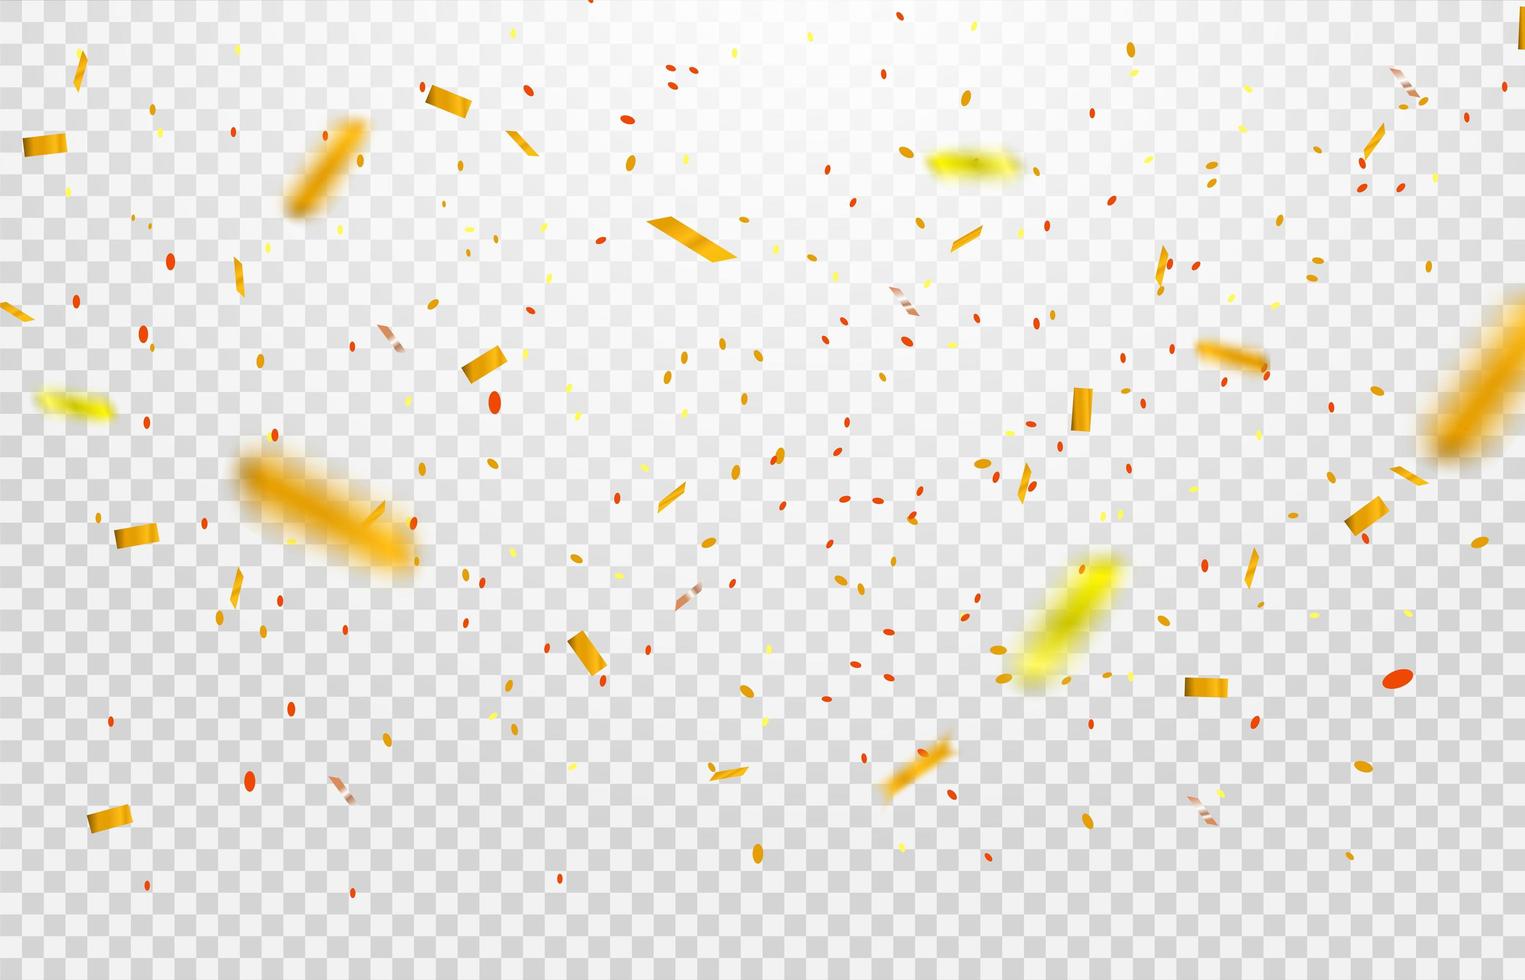 Confetti elements falling on trasparent background. vector